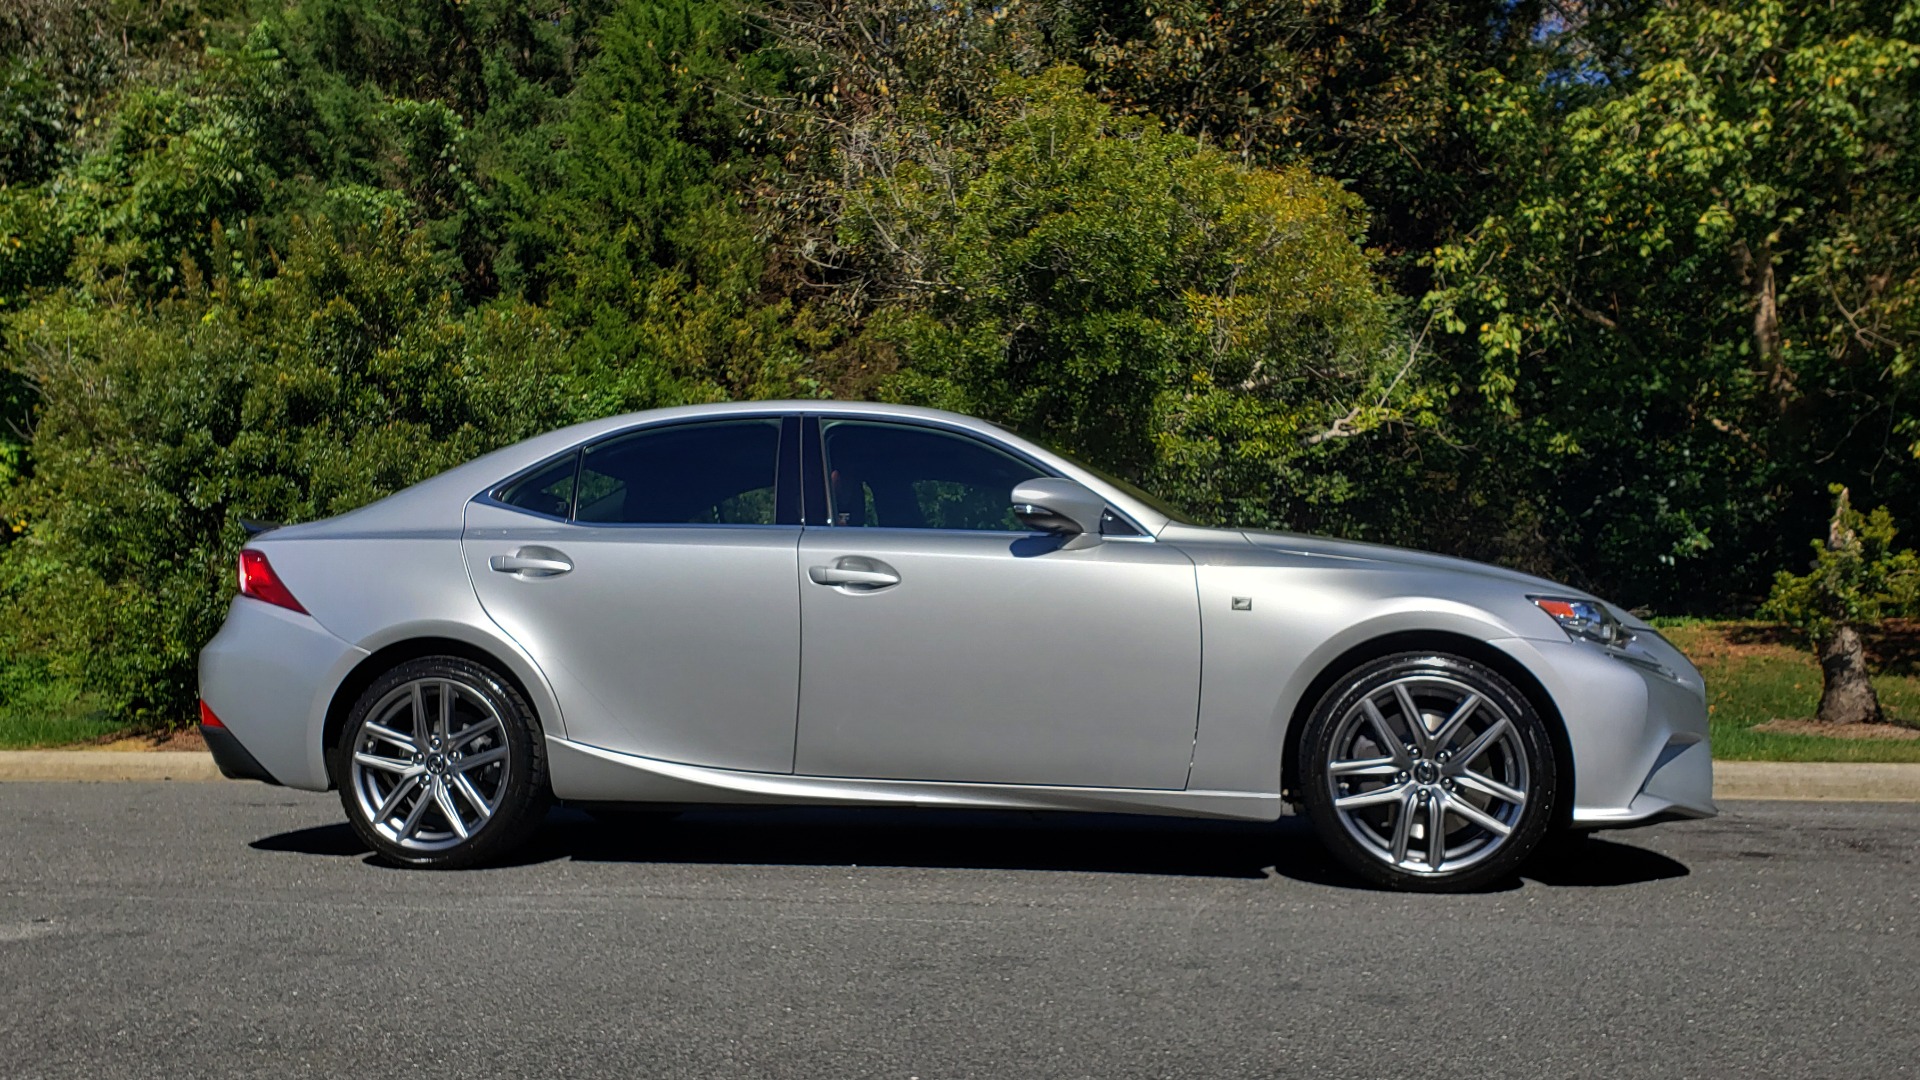 Used 2015 Lexus IS 350 F-SPORT / AWD / NAV / SUNROOF / BSM / REARVIEW for sale Sold at Formula Imports in Charlotte NC 28227 5